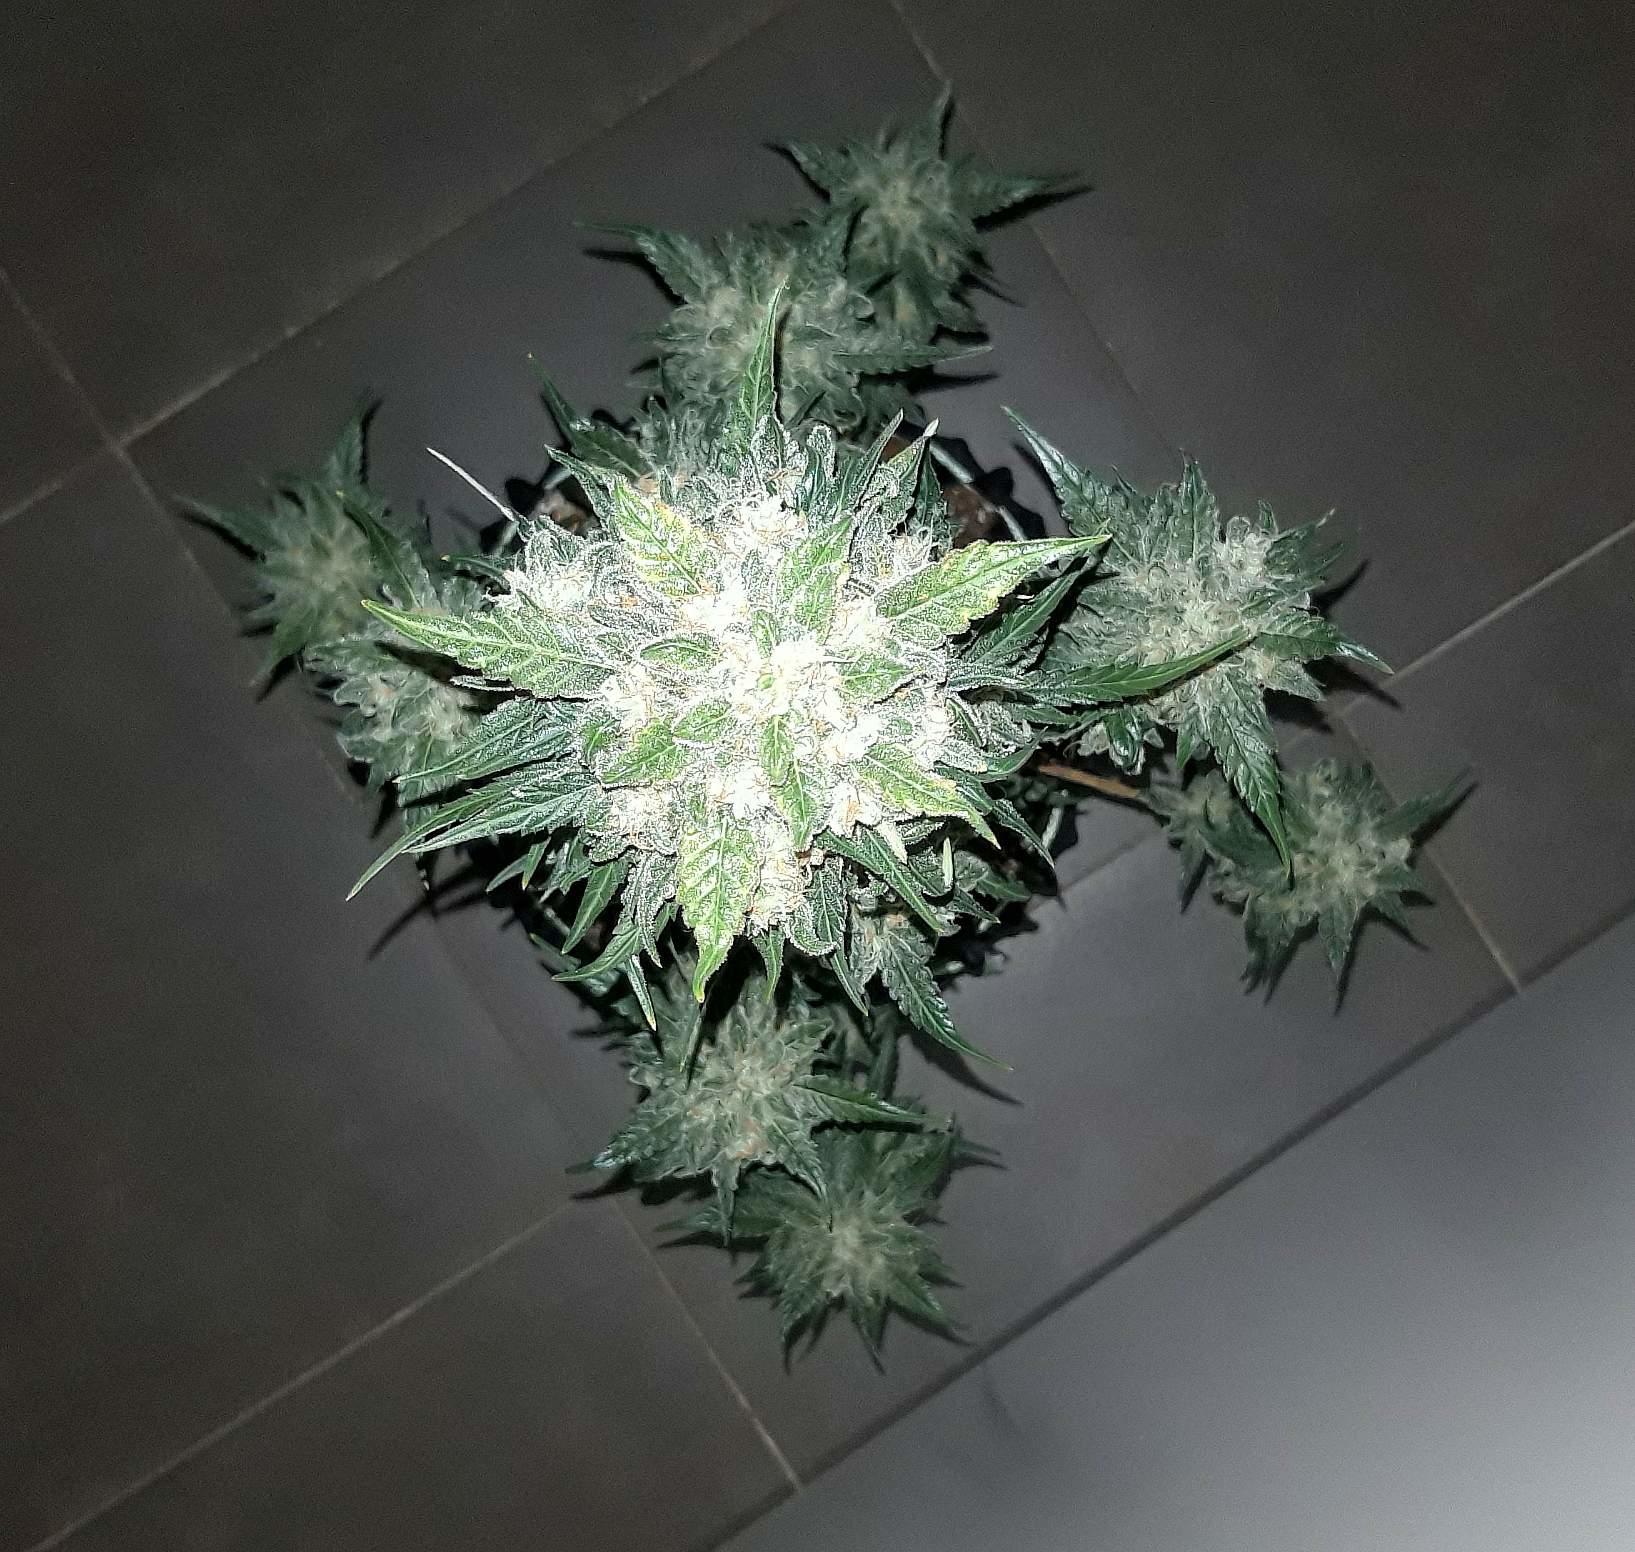 a green and white plant on a tile floor